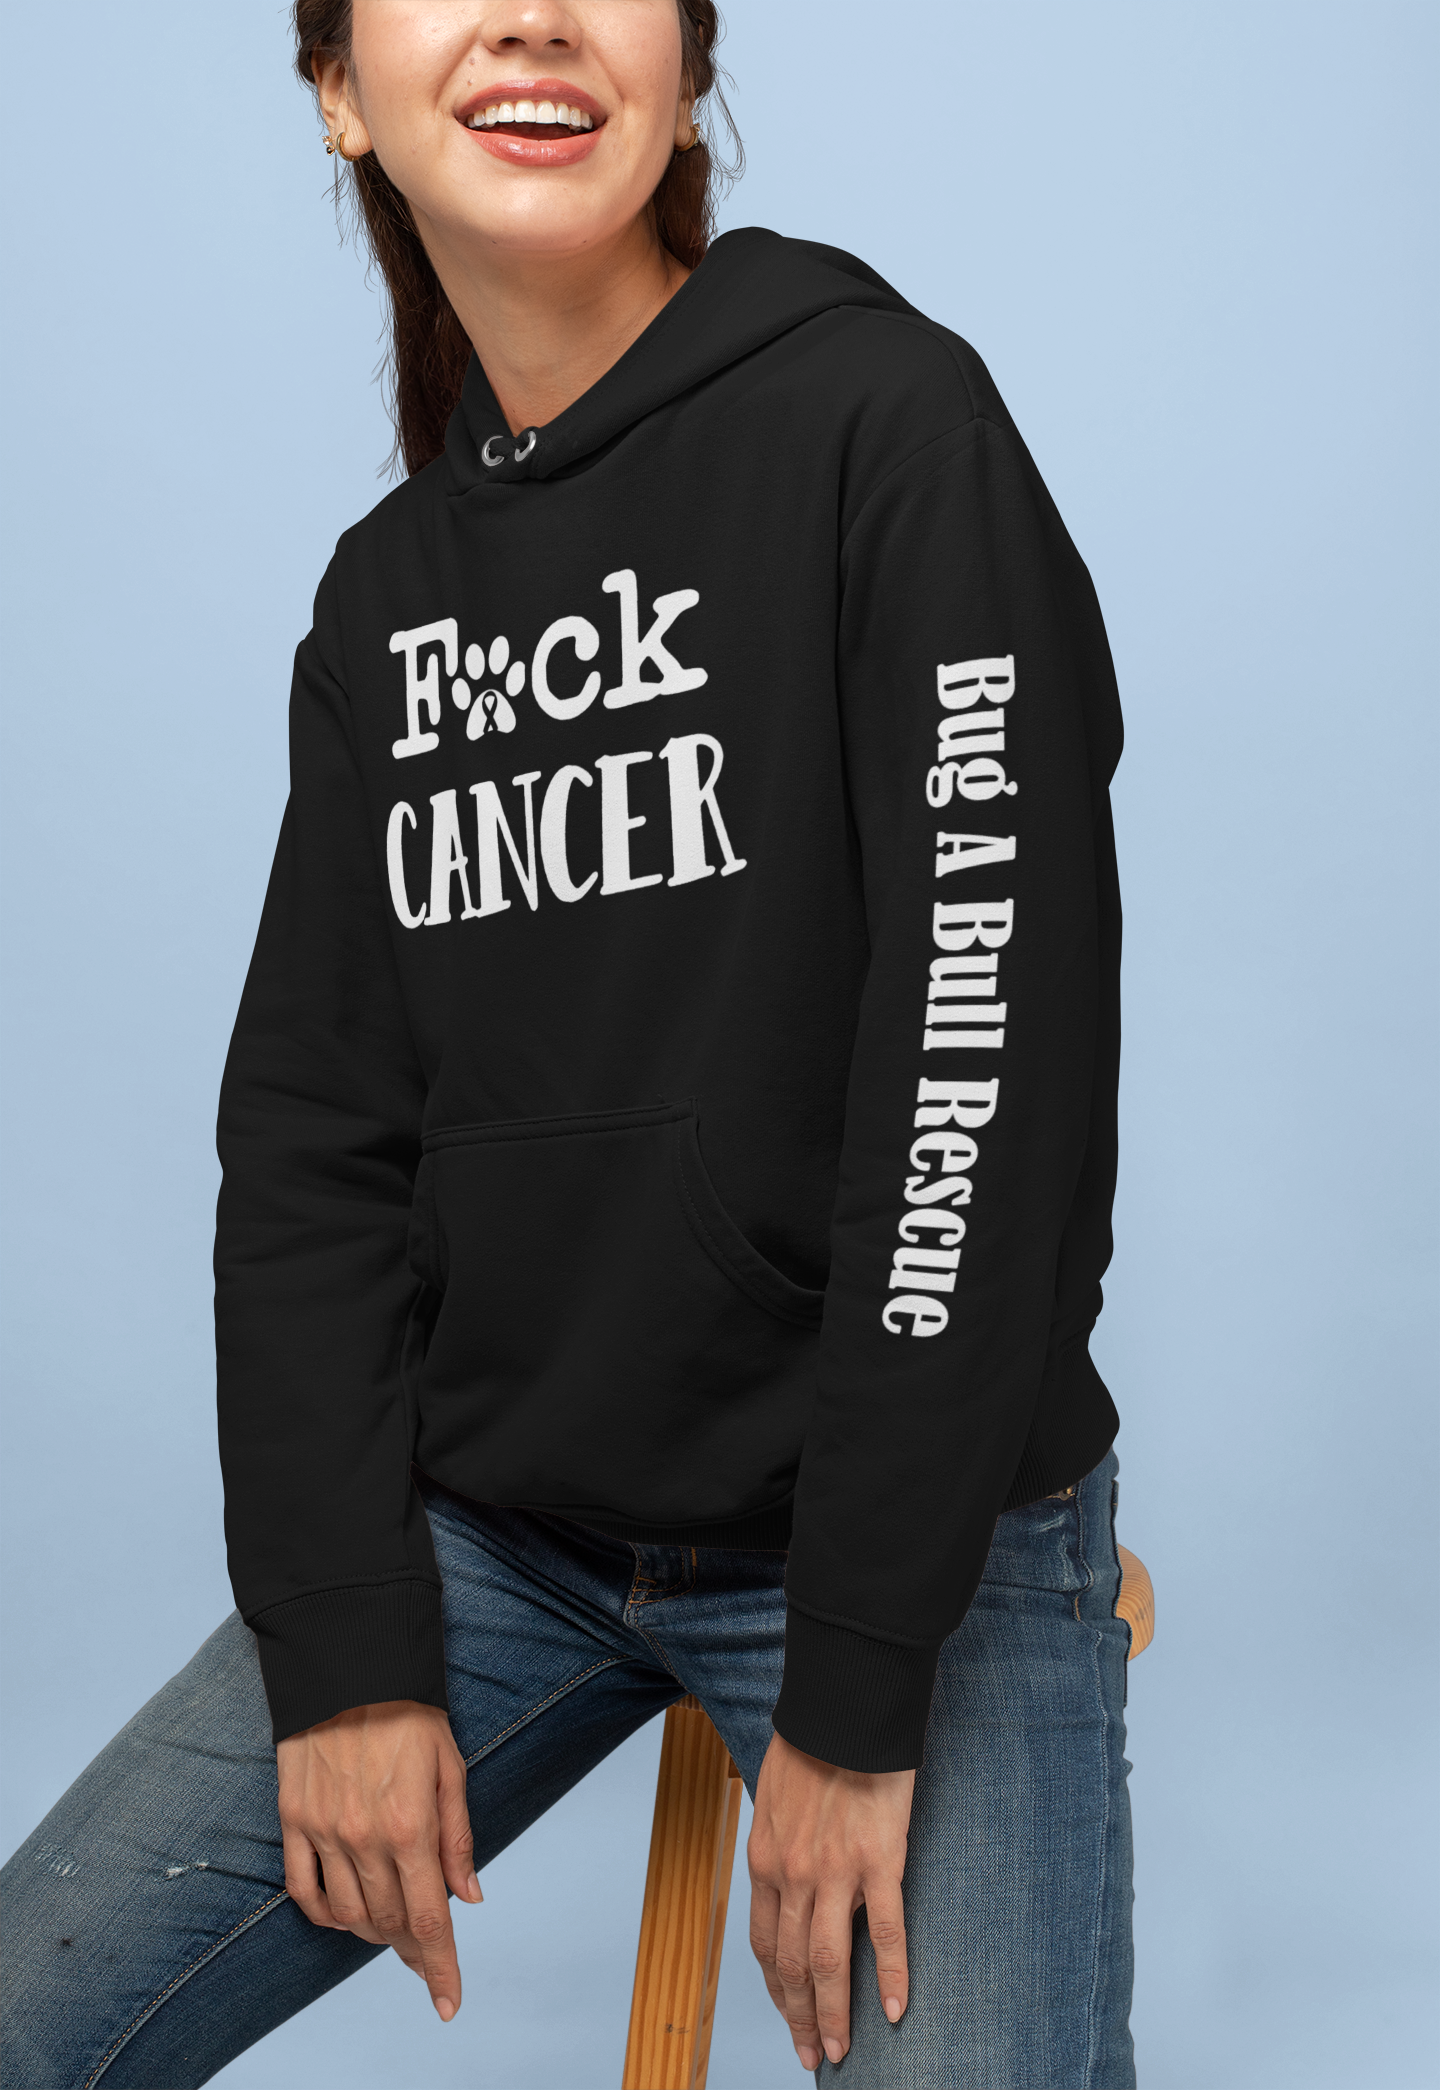 F*ck Cancer Bug a Bull Rescue - Unisex Pullover Hoodie - Ruff Life Rescue Wear